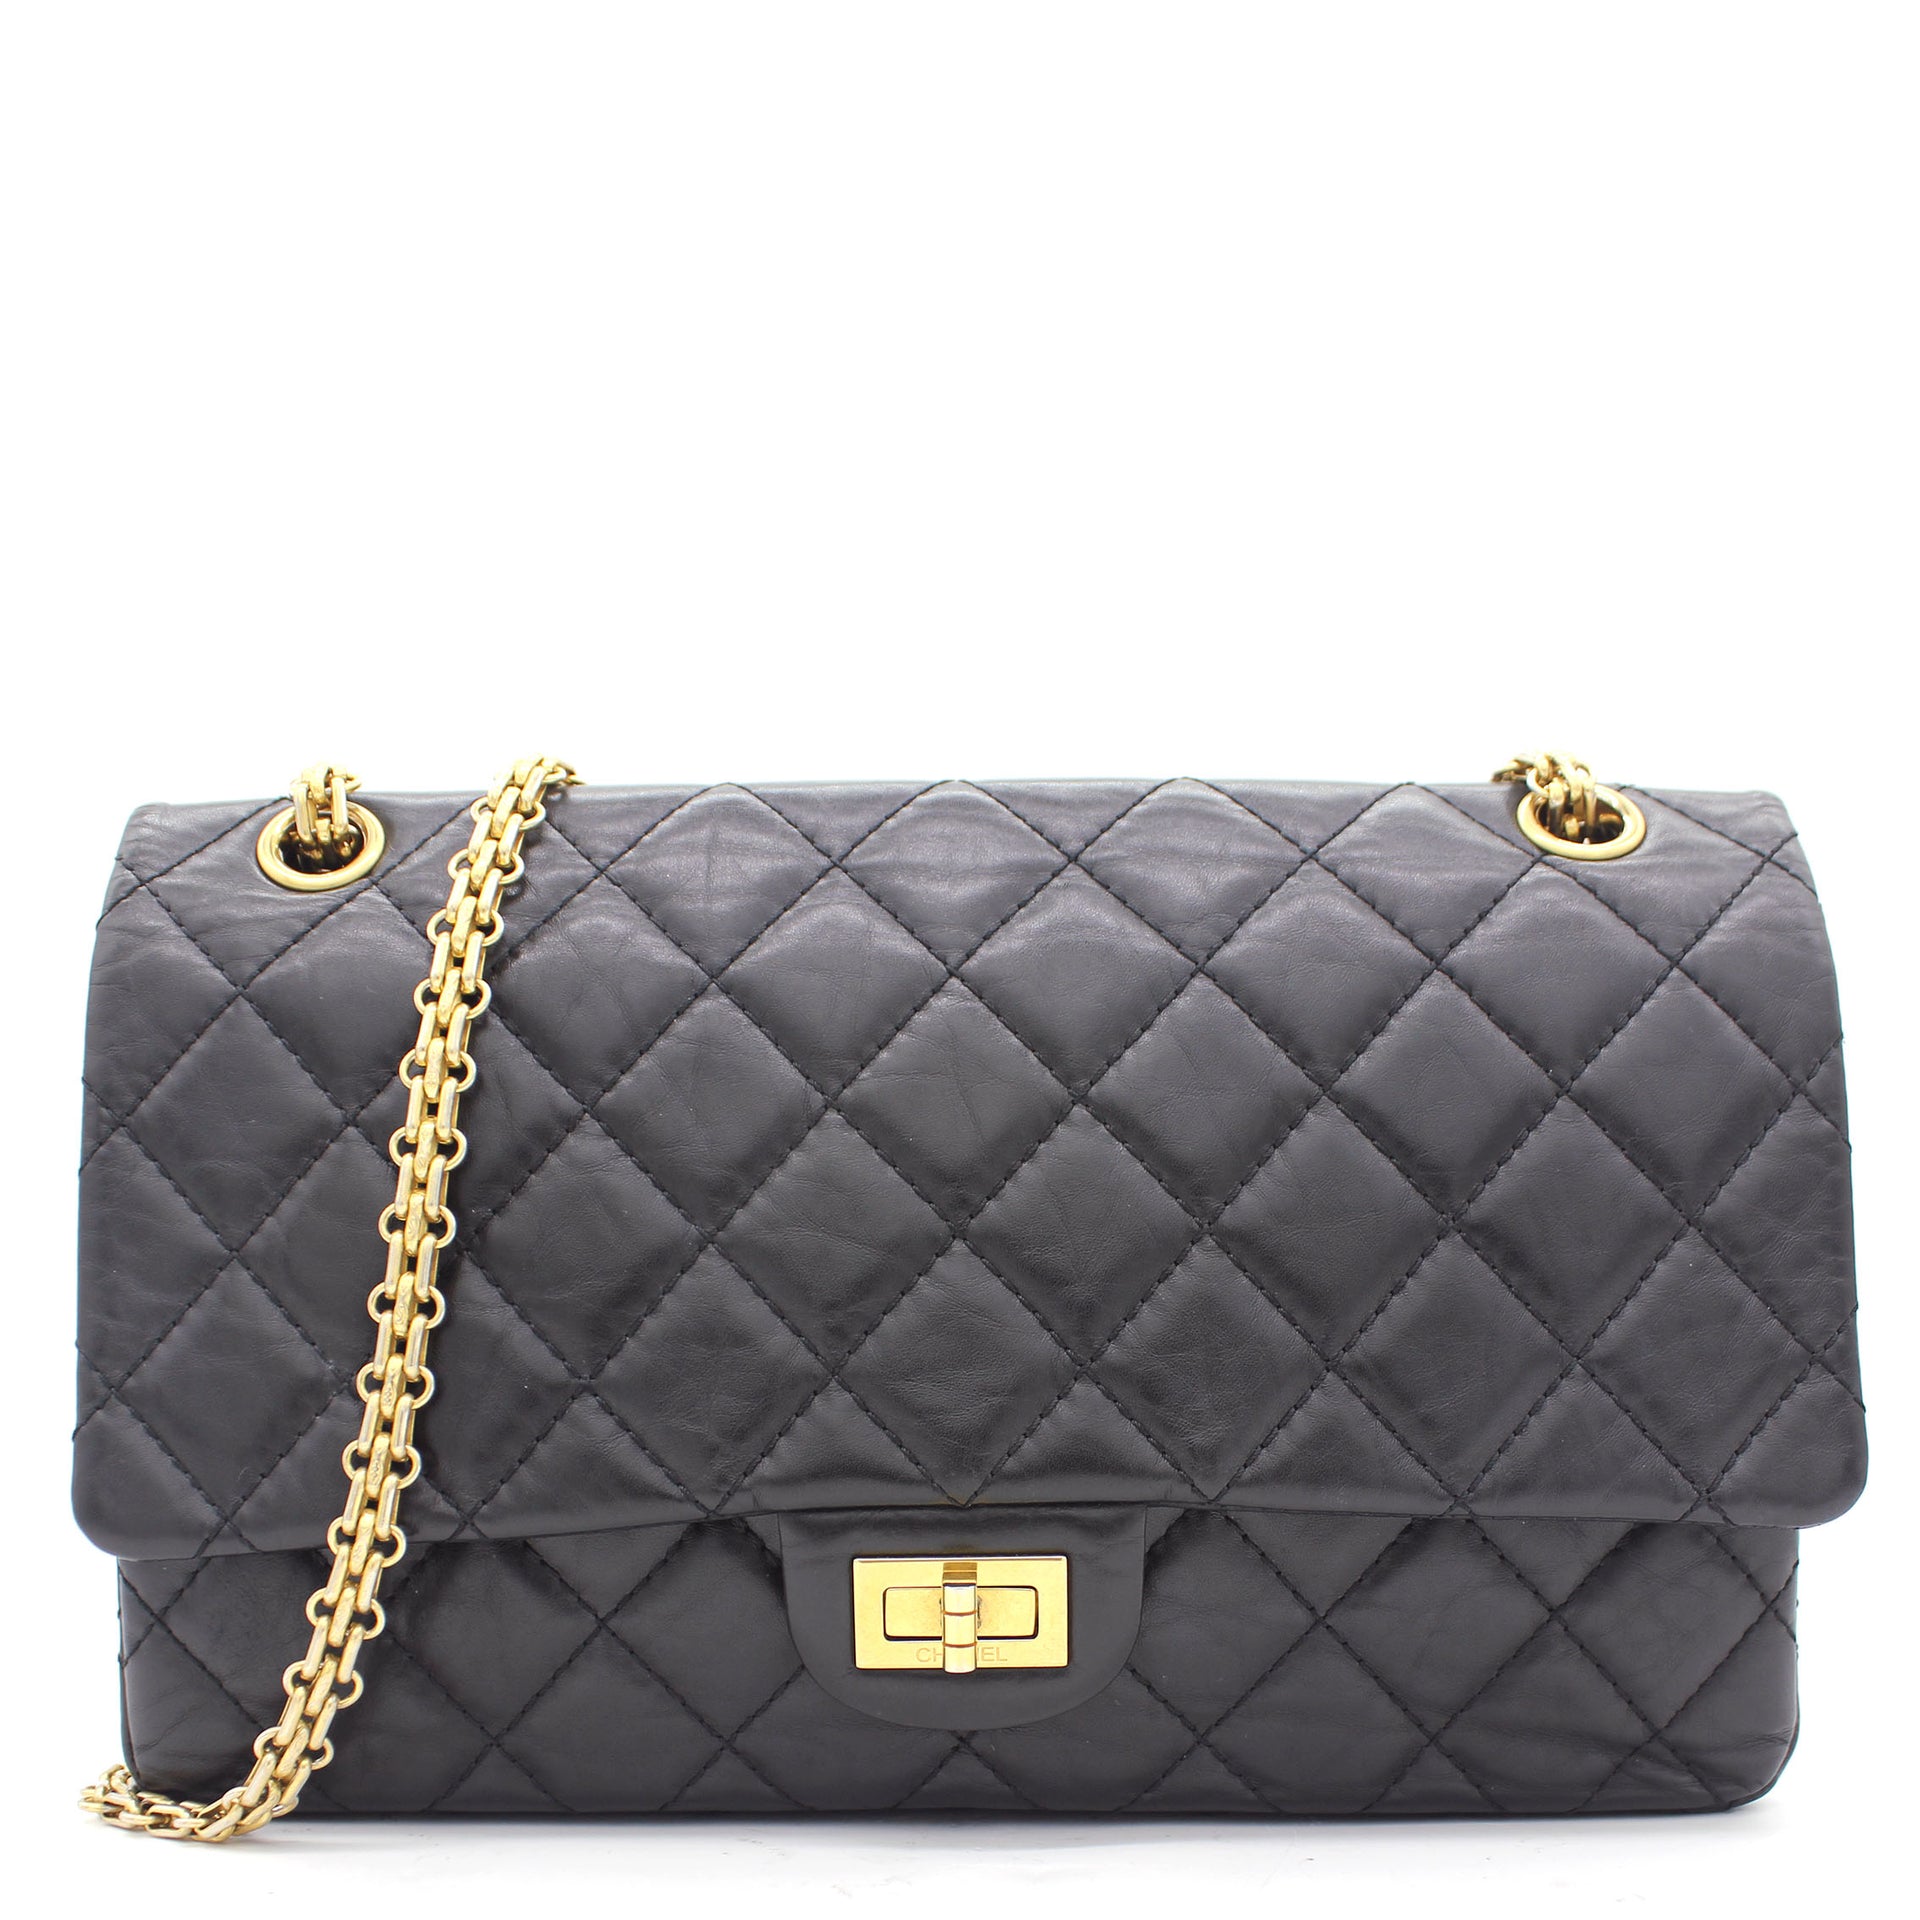 Chanel Black Quilted Crinkled Leather 226 Classic Reissue 2.55